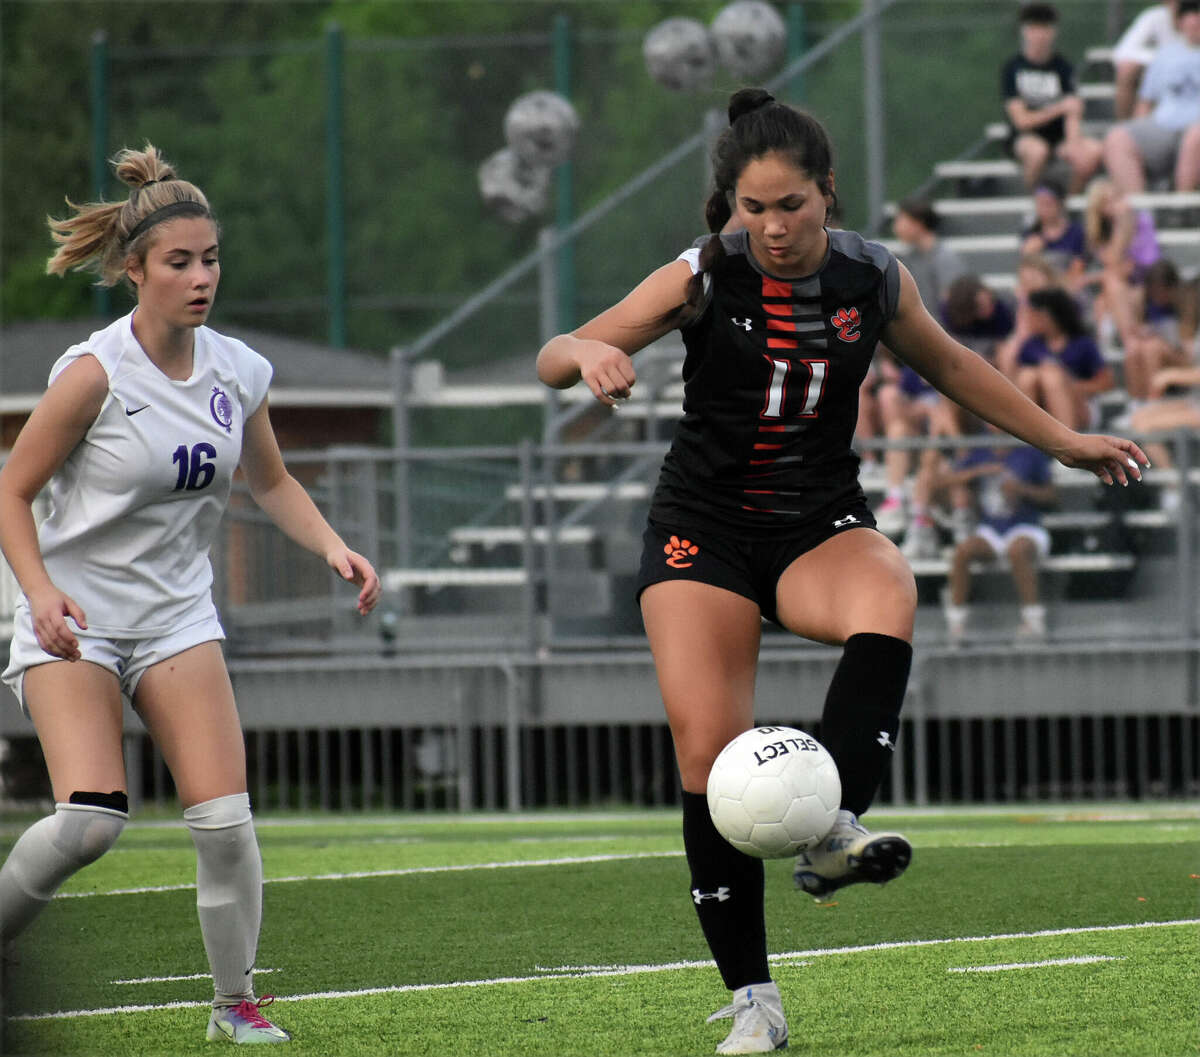 Edwardsville's Olivia Baca settles the ball against Collinsville inside the District 7 Sports Complex in Edwardsville.